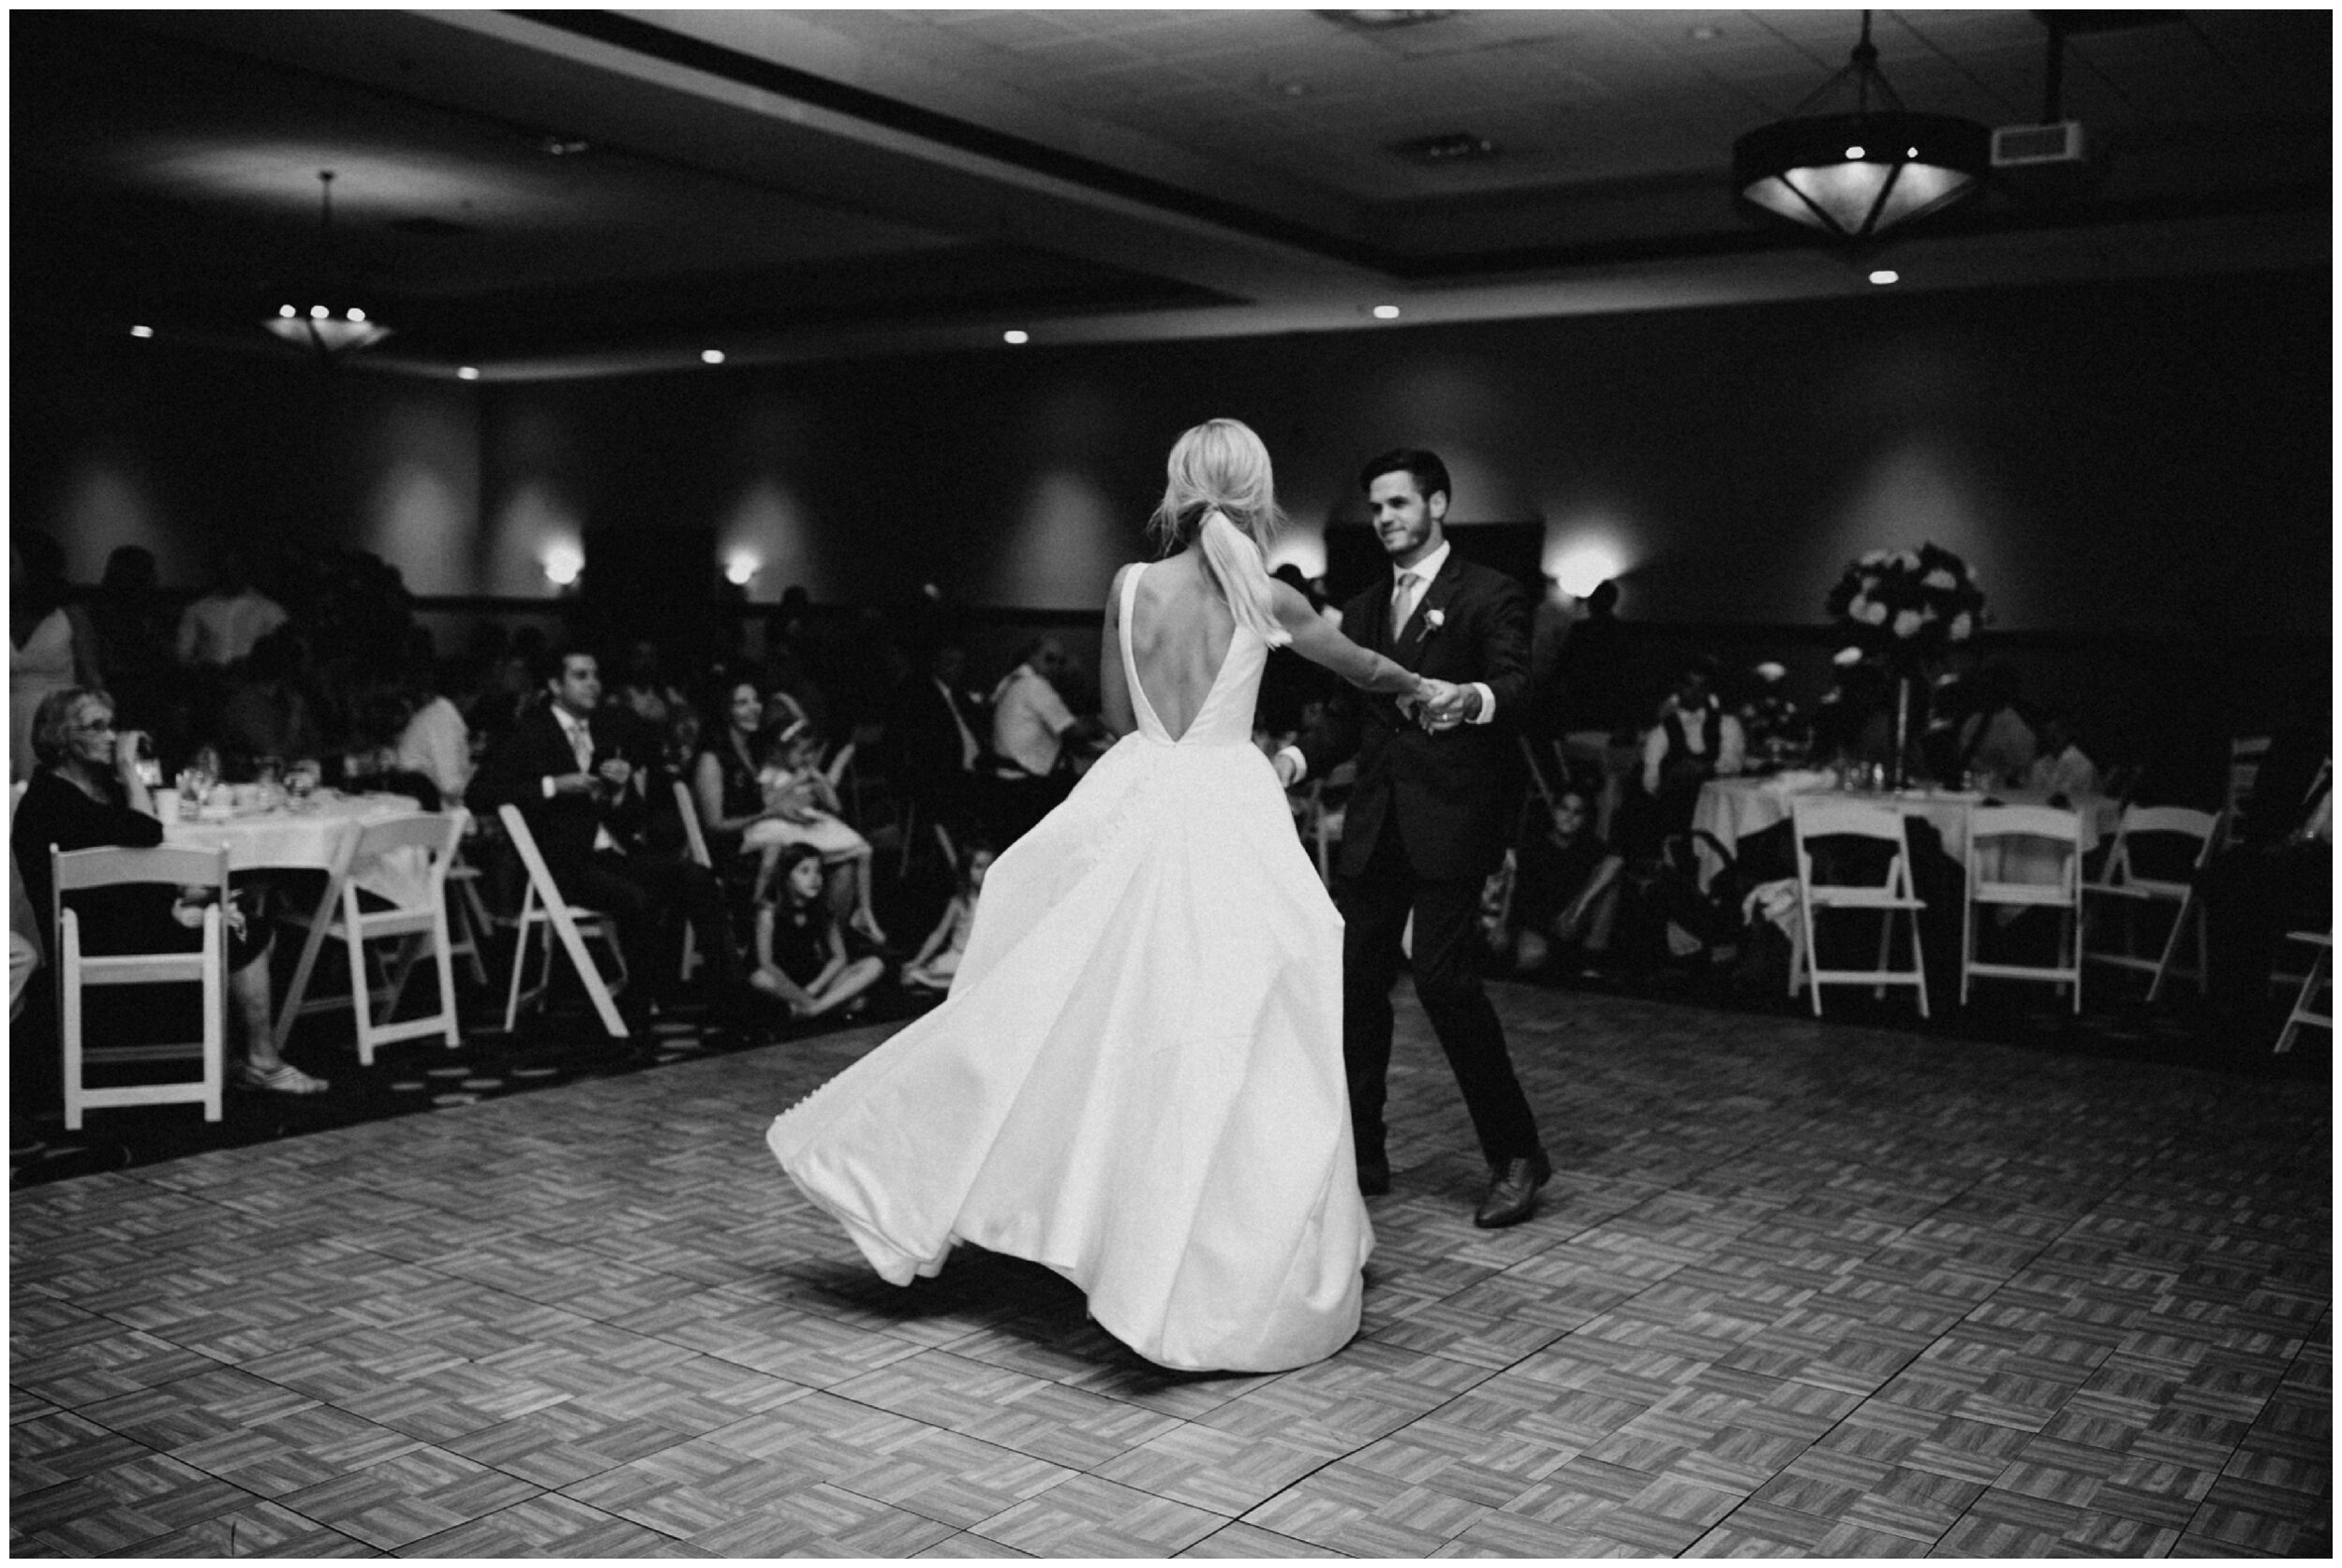 Bride and groom dancing during wedding reception at Grand View Lodge on Gull Lake